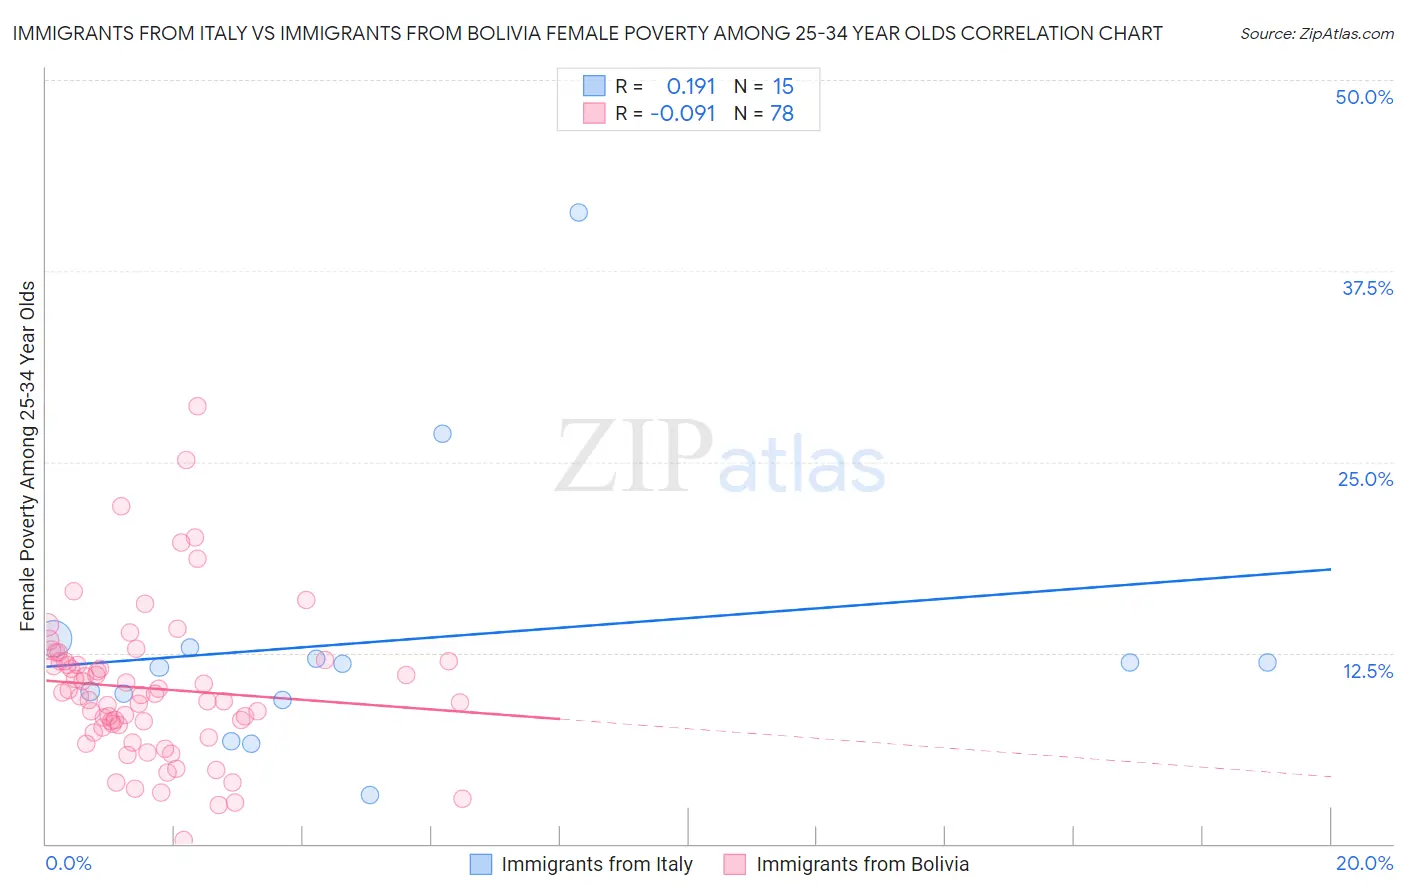 Immigrants from Italy vs Immigrants from Bolivia Female Poverty Among 25-34 Year Olds